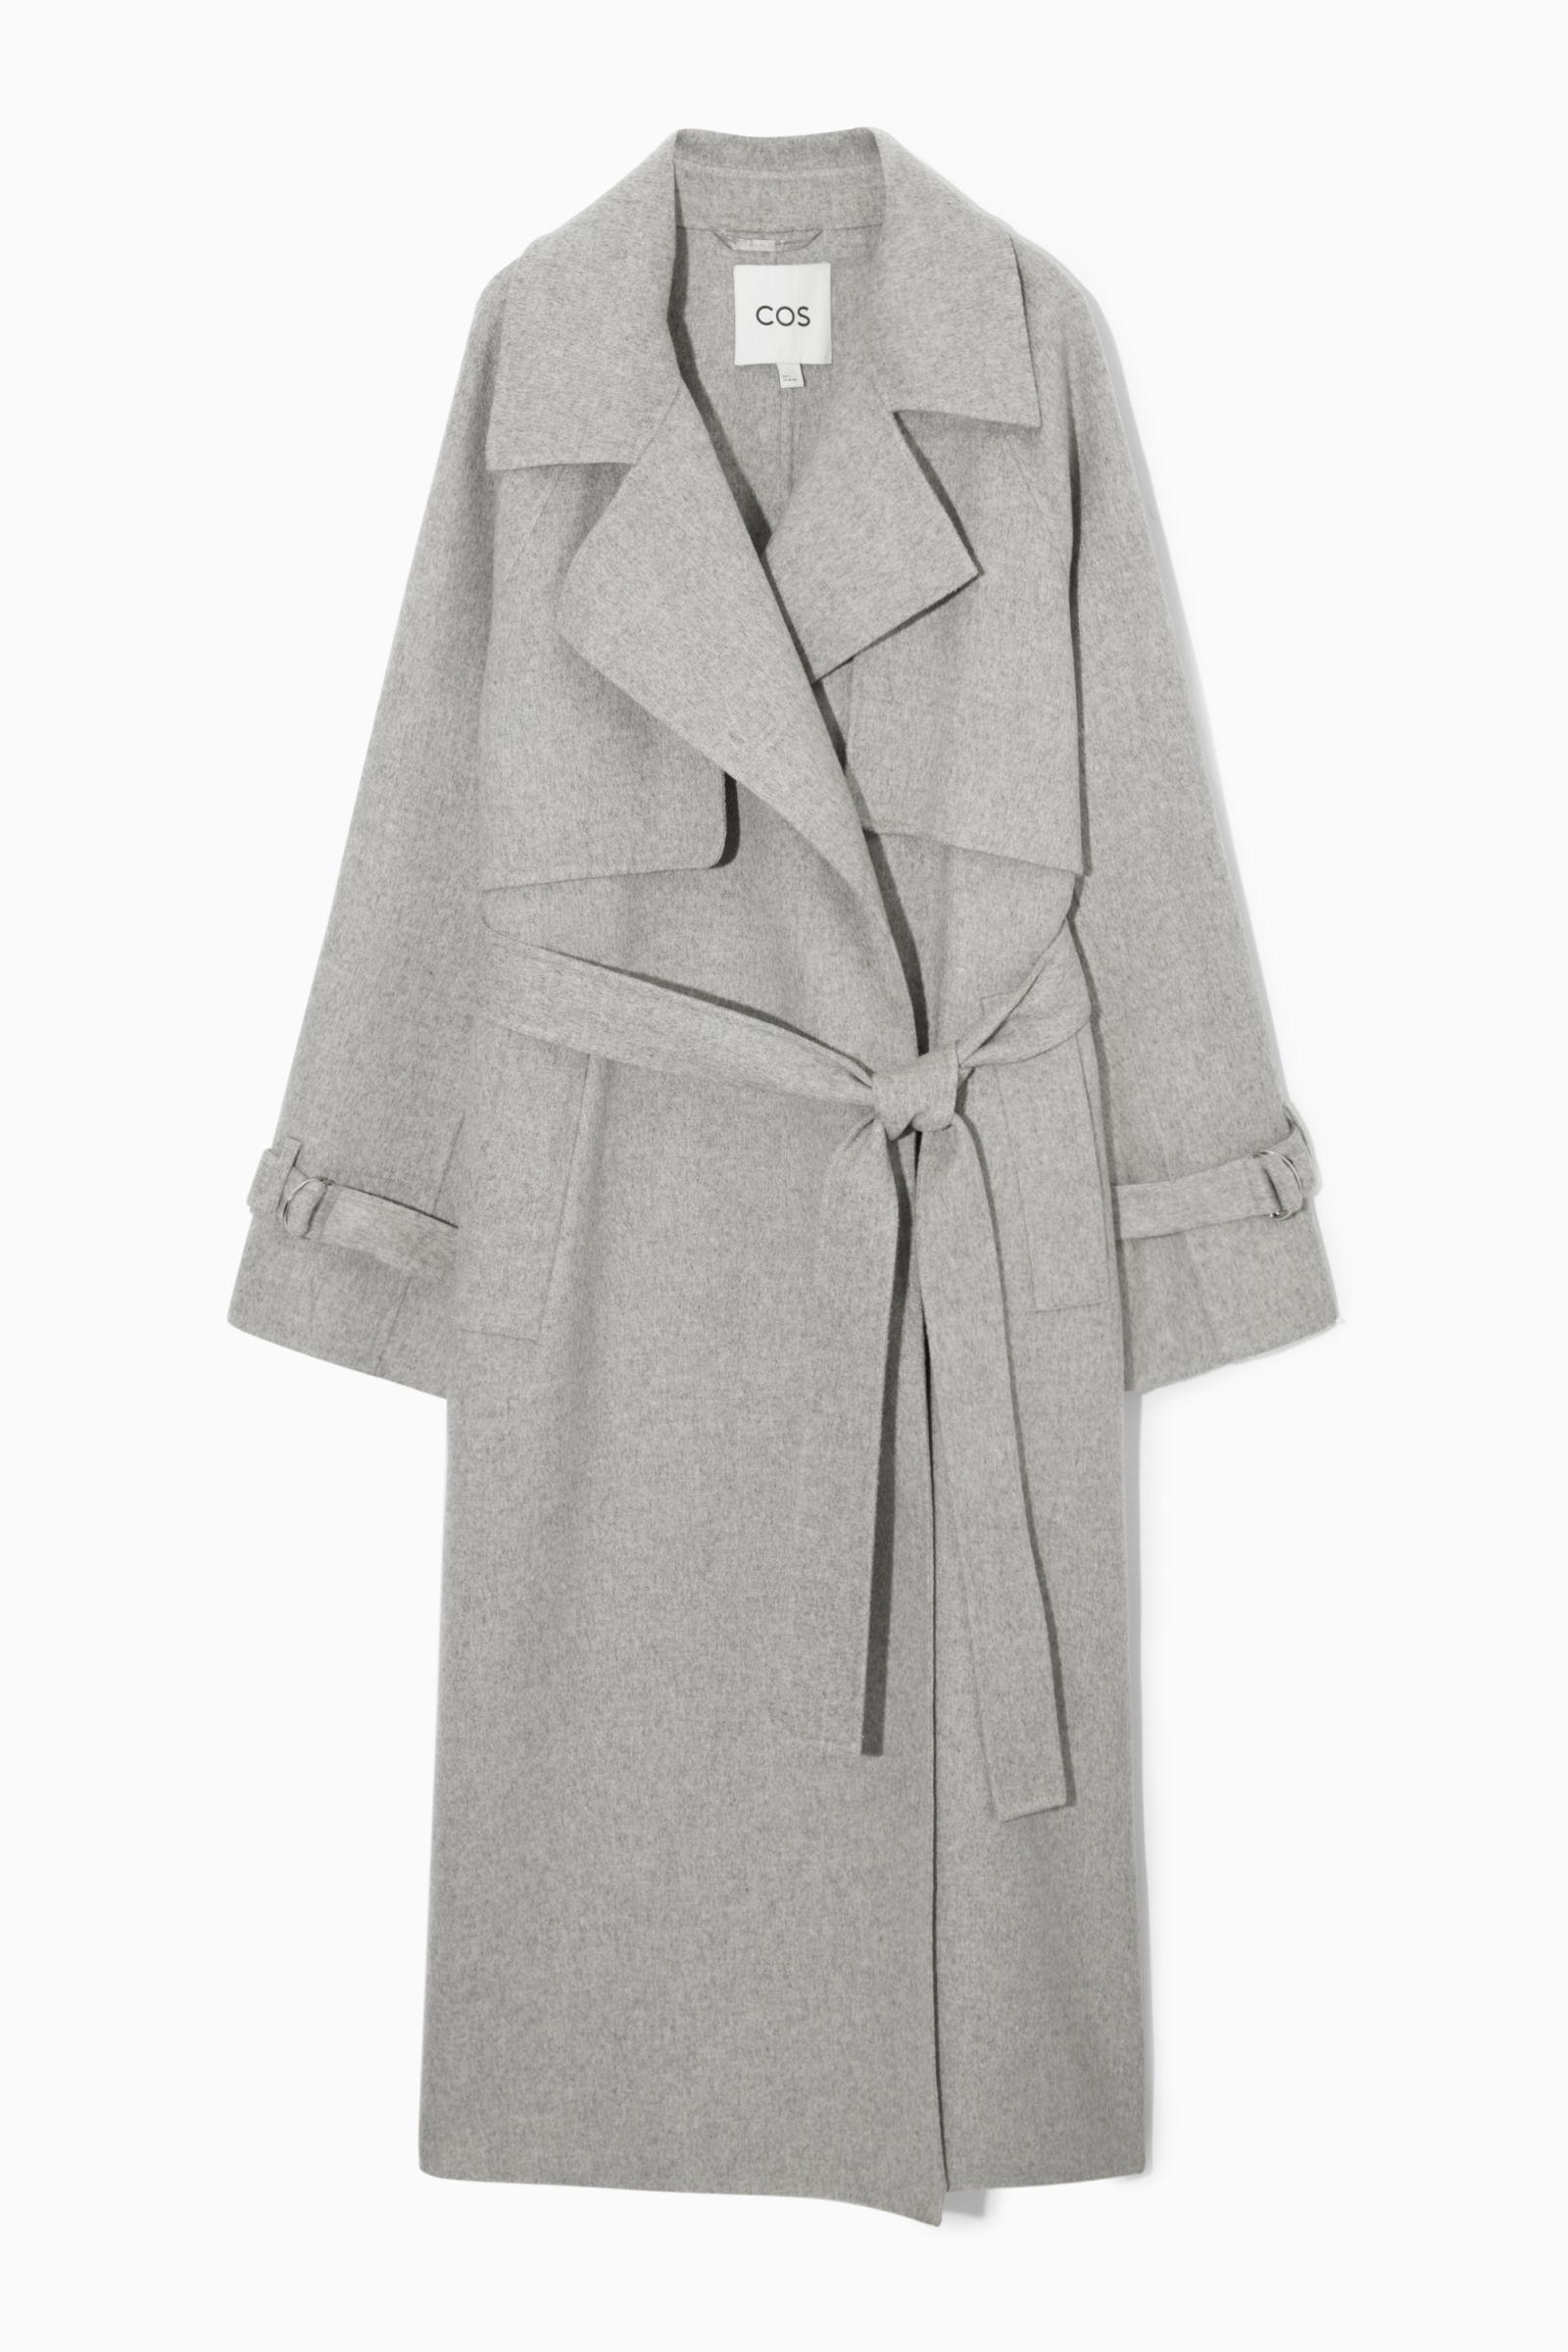 COS Double-faced Wool Trench Coat in Grey | Lyst UK